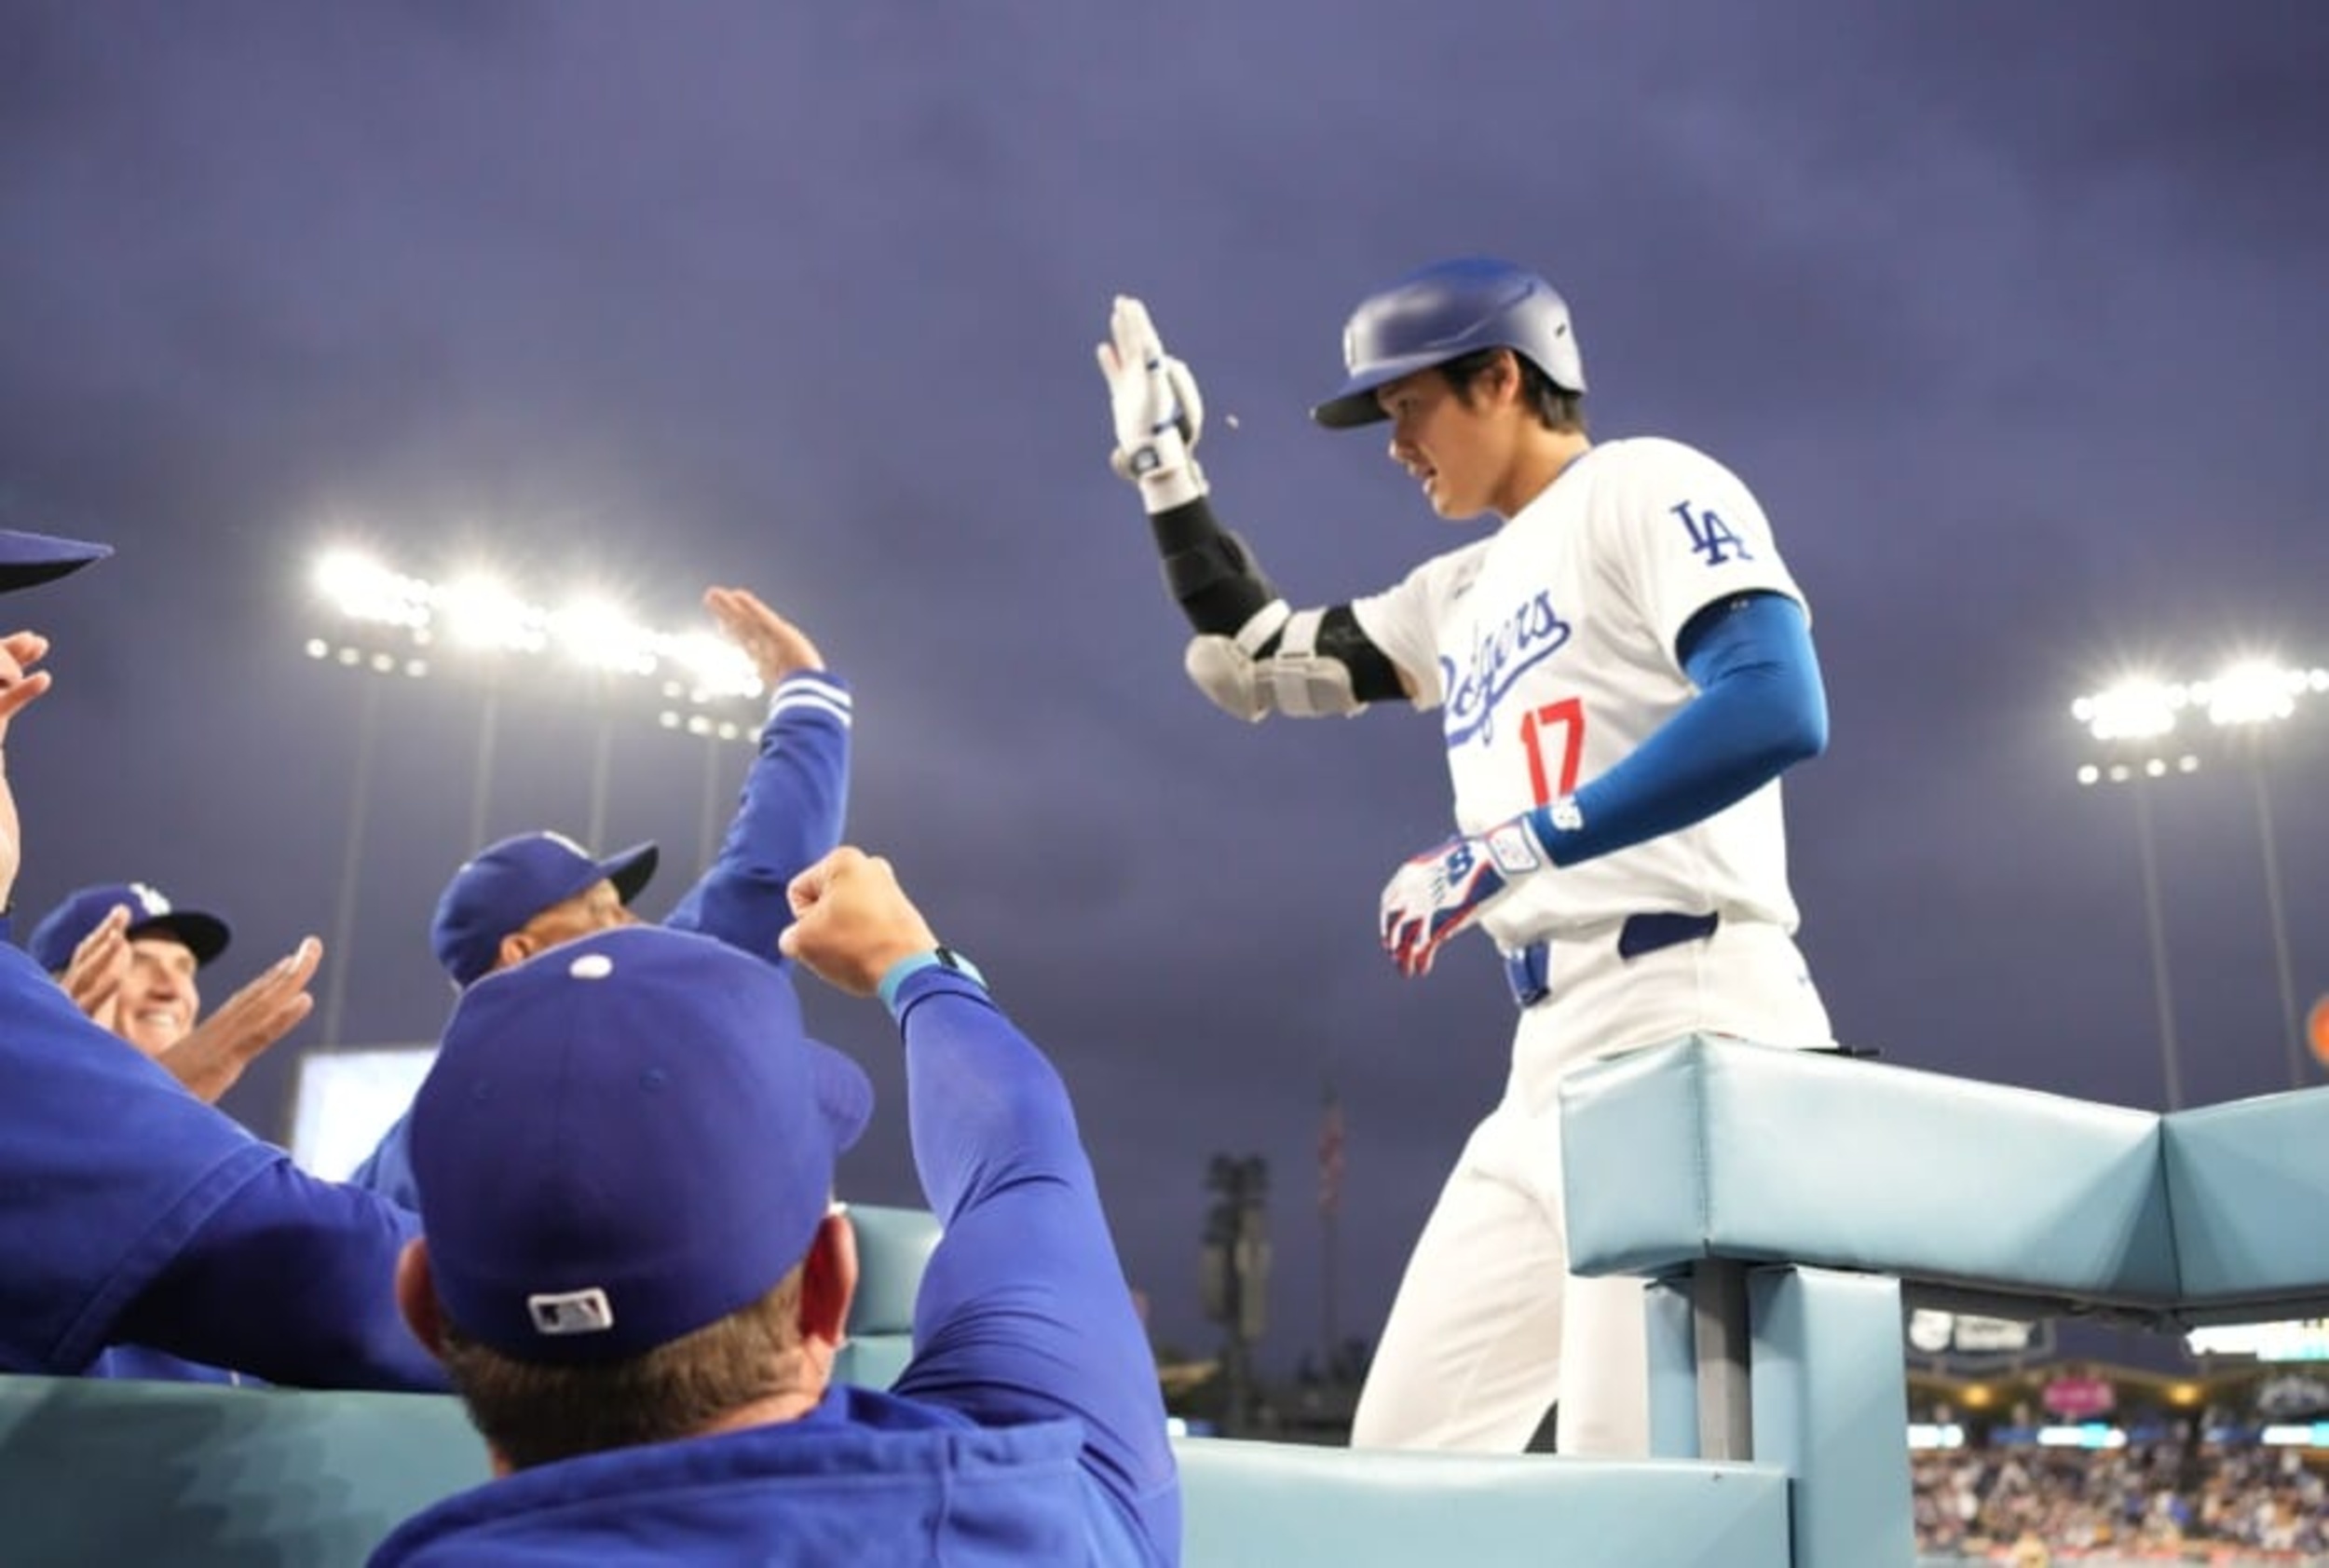 shohei ohtani breaks dodgers record with 8th home run